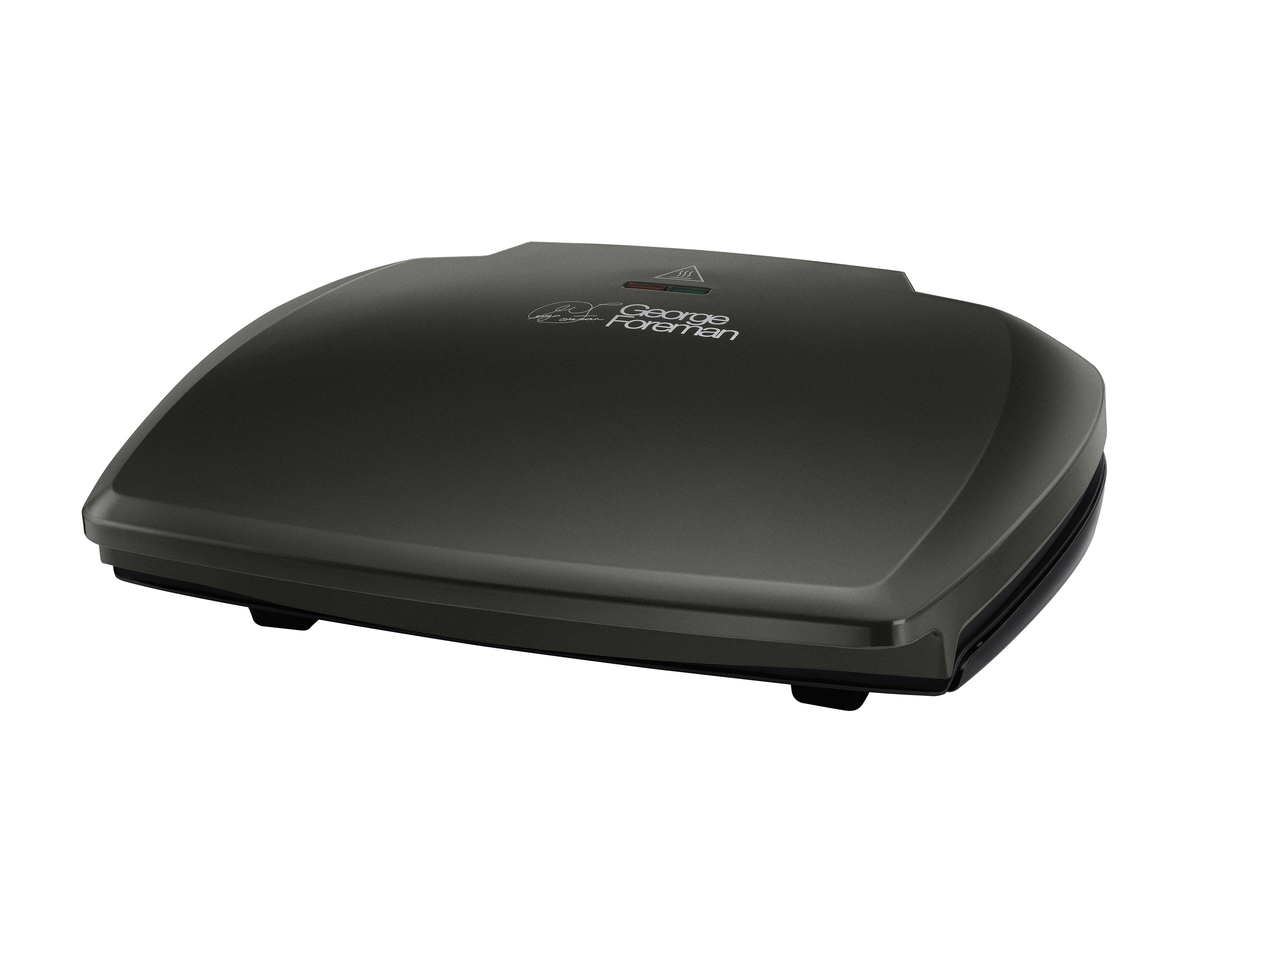 George Foreman 10 Portion Grill1